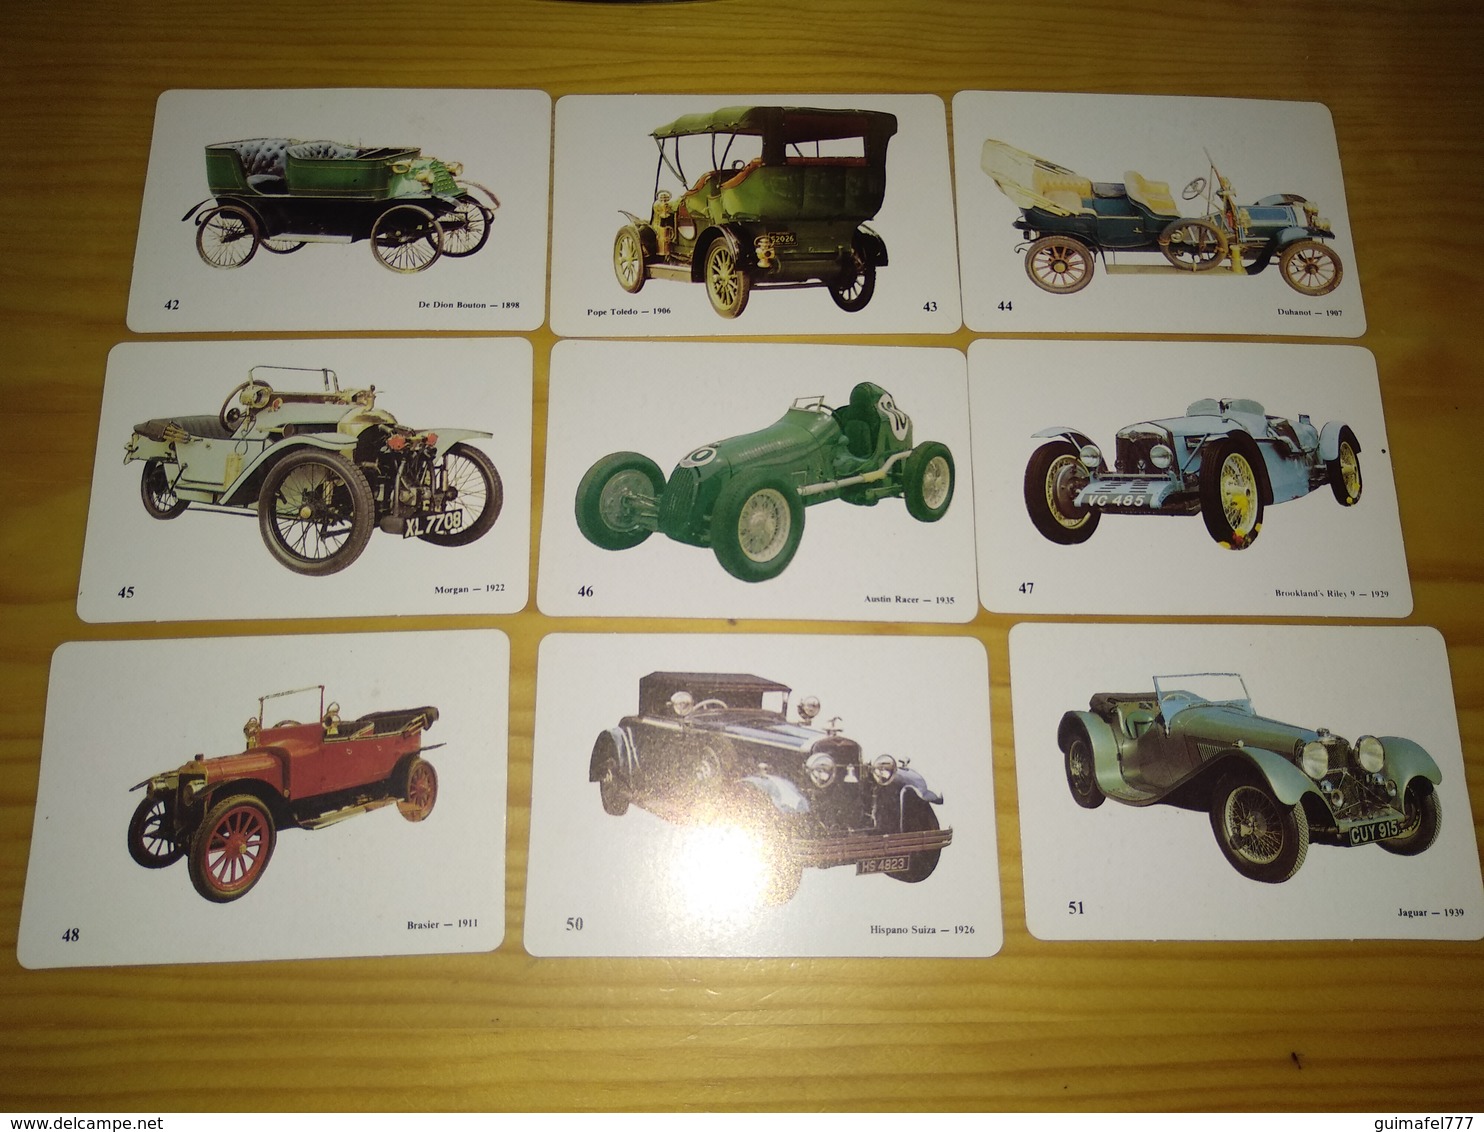 60 Calendar of pocket Portuguese, Collectible antique cars, incomplete collection